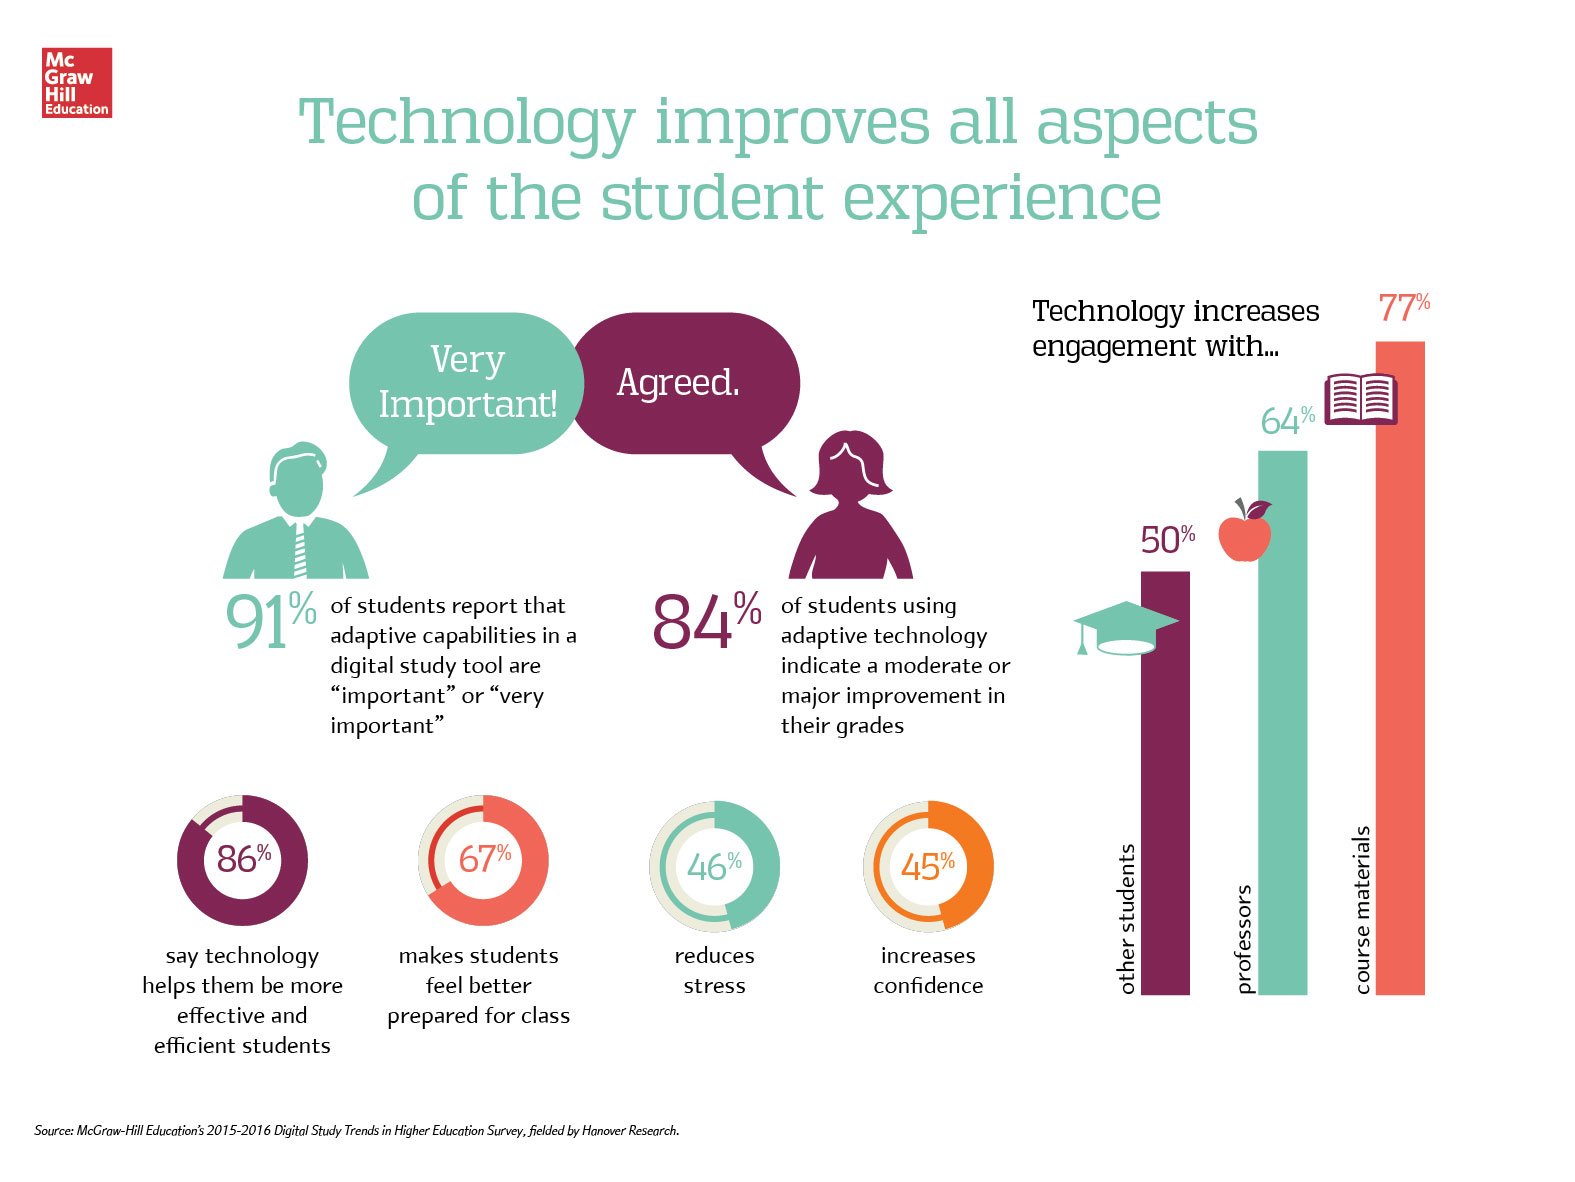 Technology improves all aspects of the student experience infographic